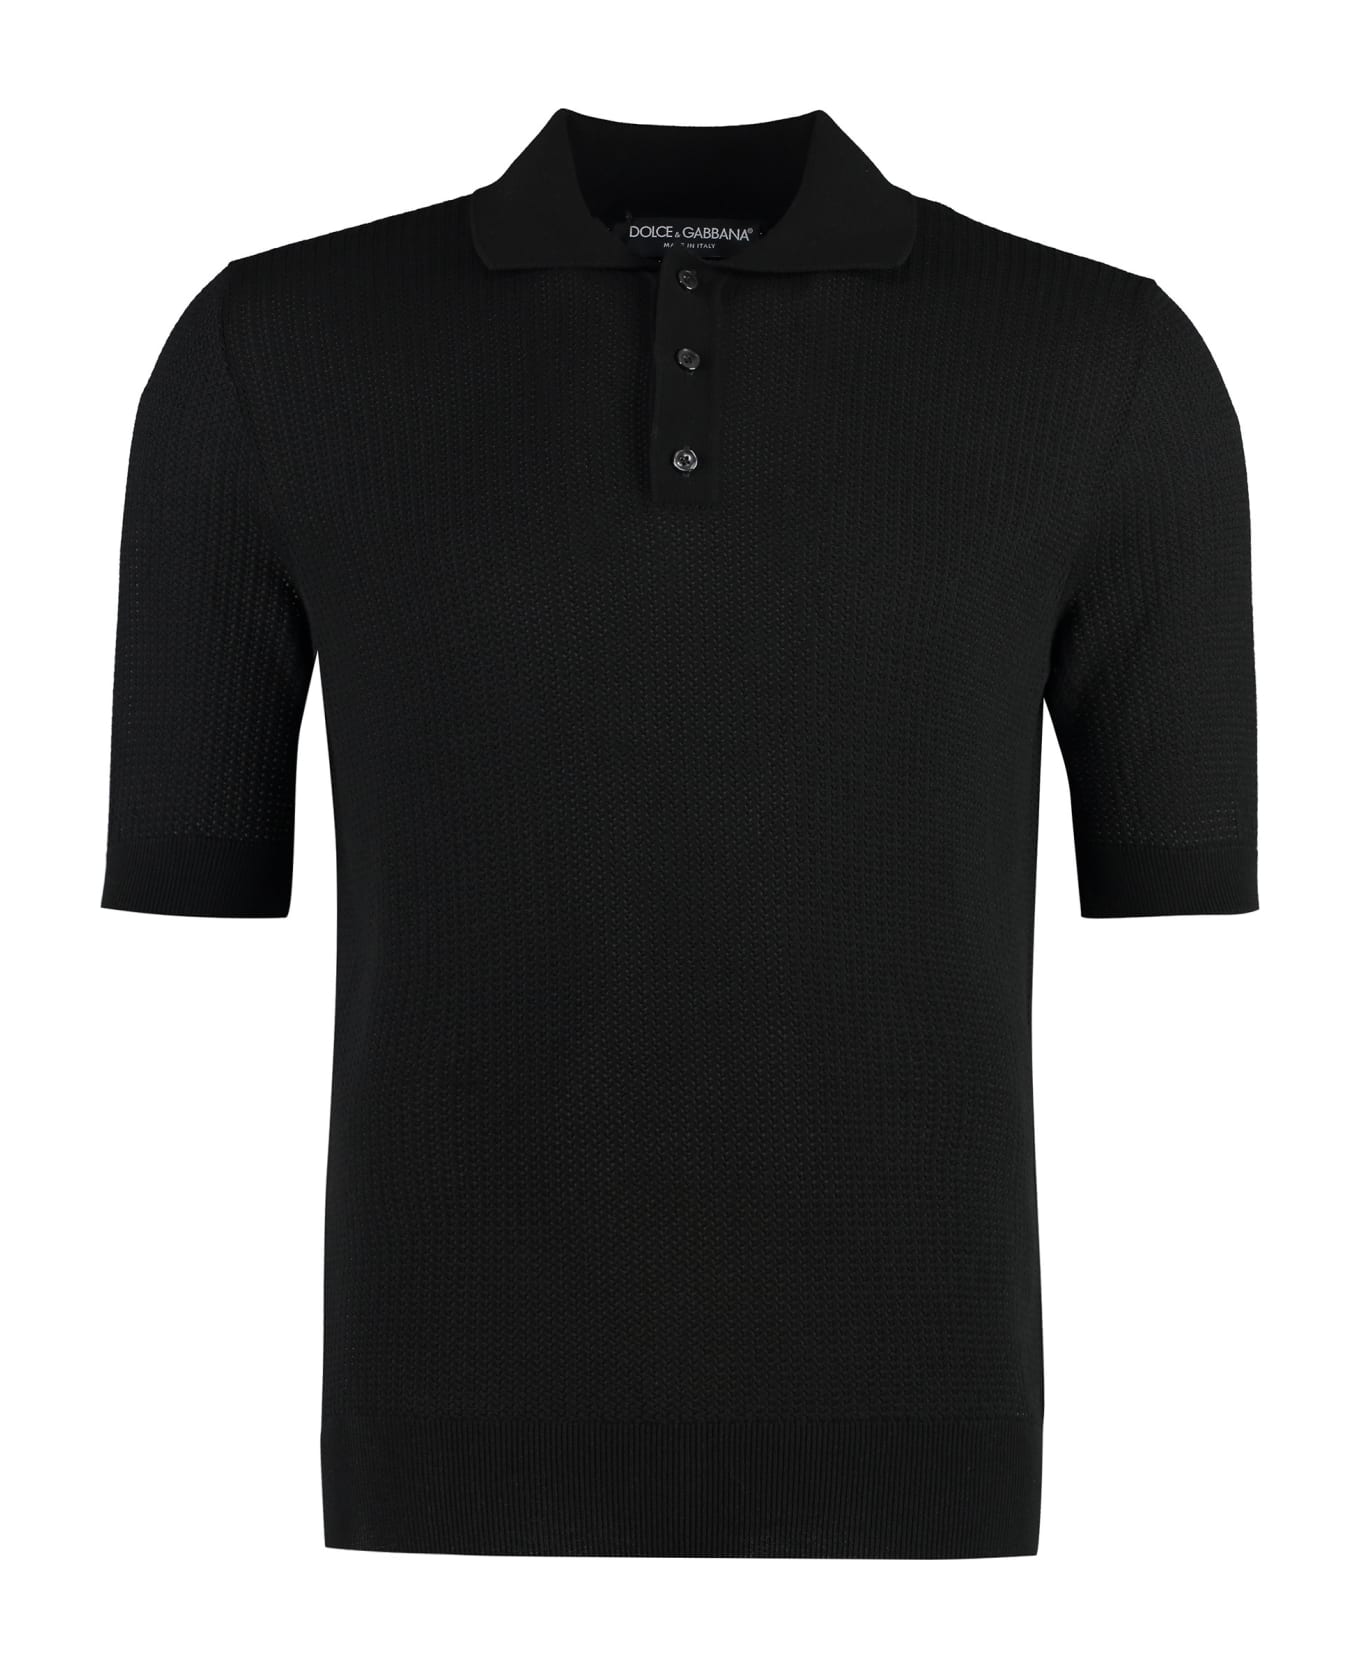 Dolce & Gabbana Knitted Cotton Polo Shirt - black ポロシャツ